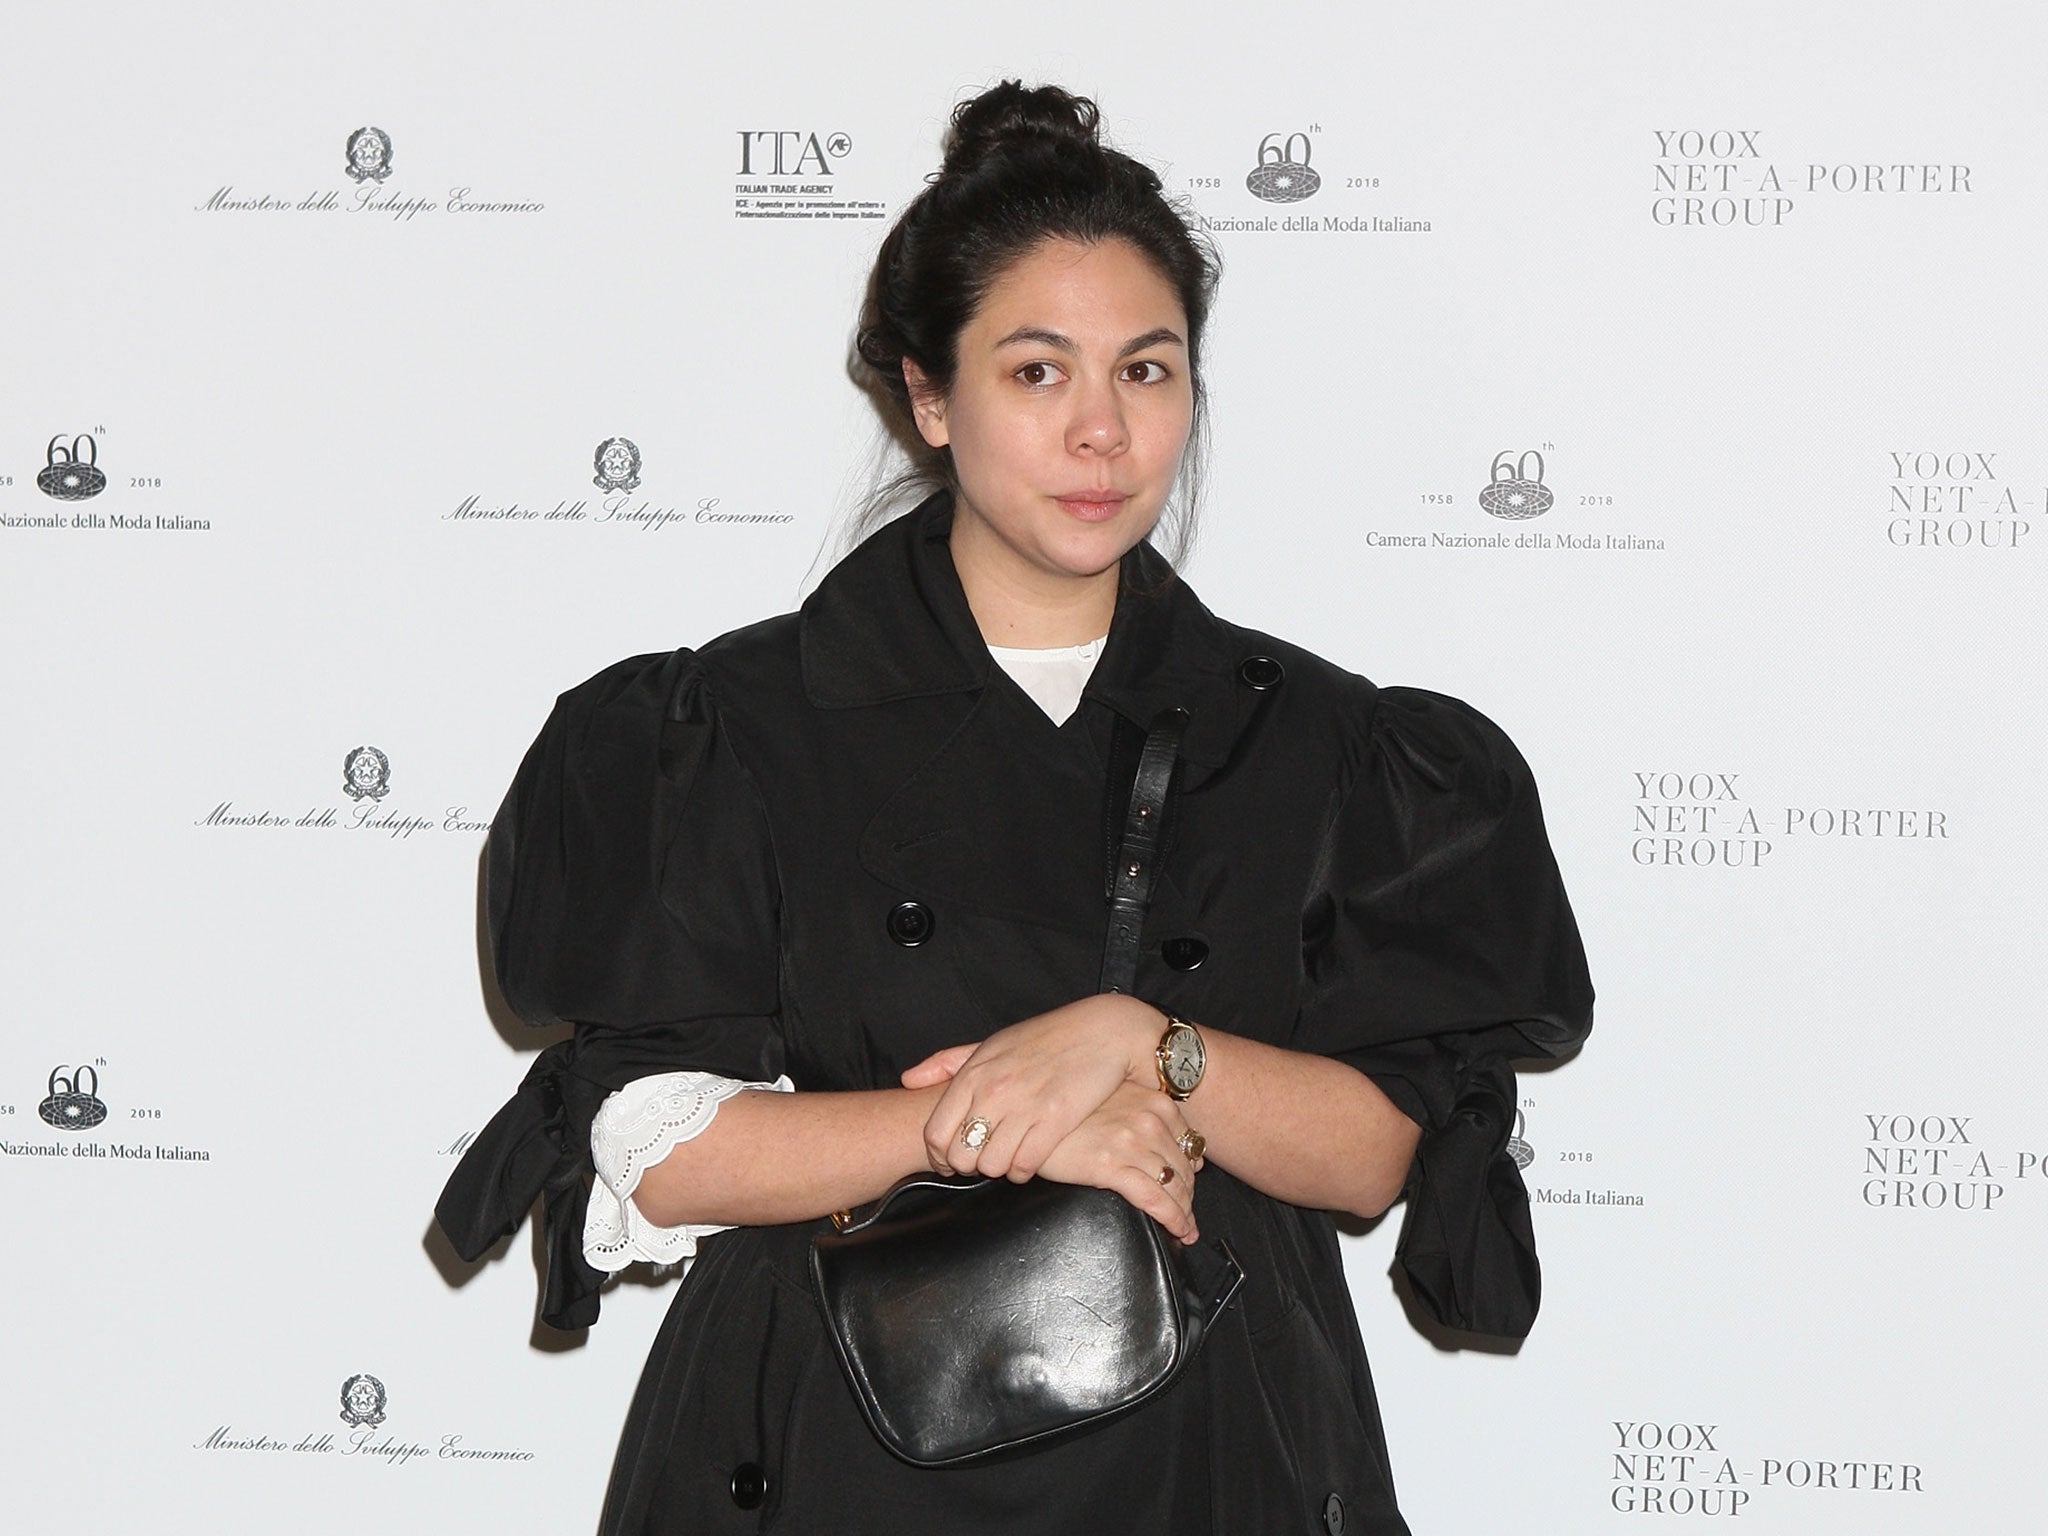 At 32, Simone Rocha has become a designer whose unique vision will go down in the fashion history canon as something akin to the work of intellectual designers like Coco Chanel